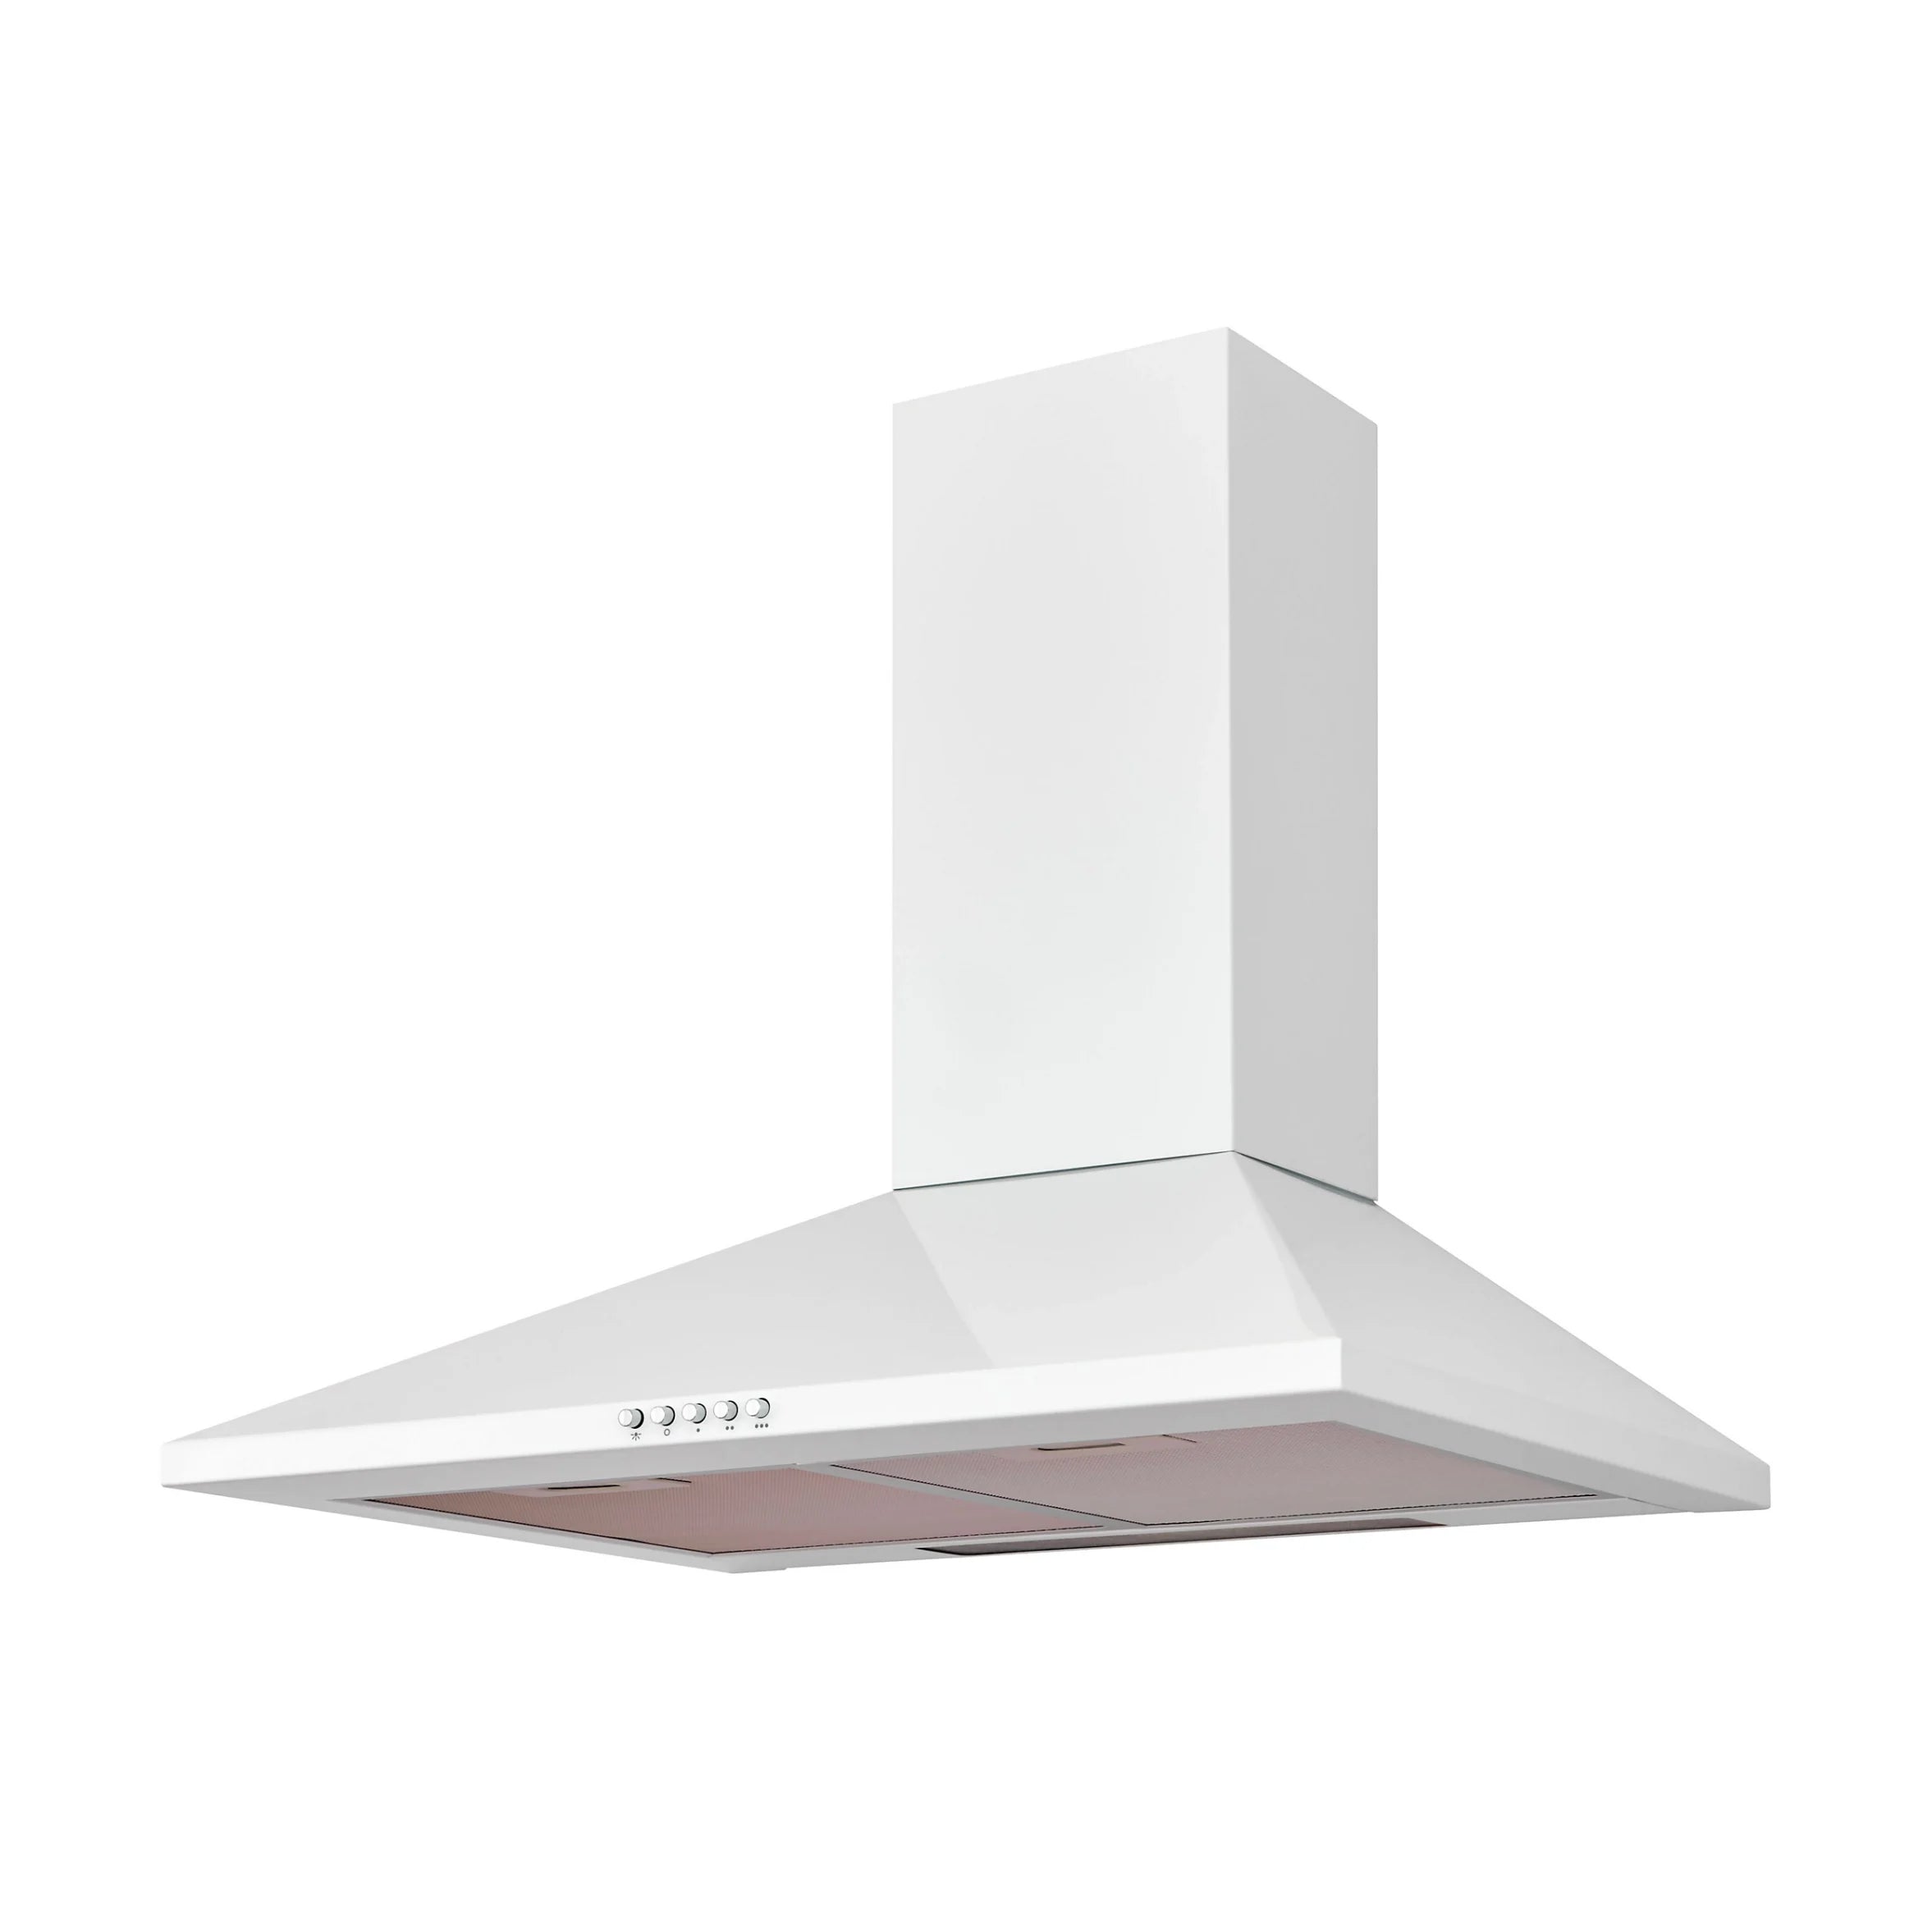 CHW60 White Steel Chimney Cooker hood, (W)60cm Cosmetic marks 7497